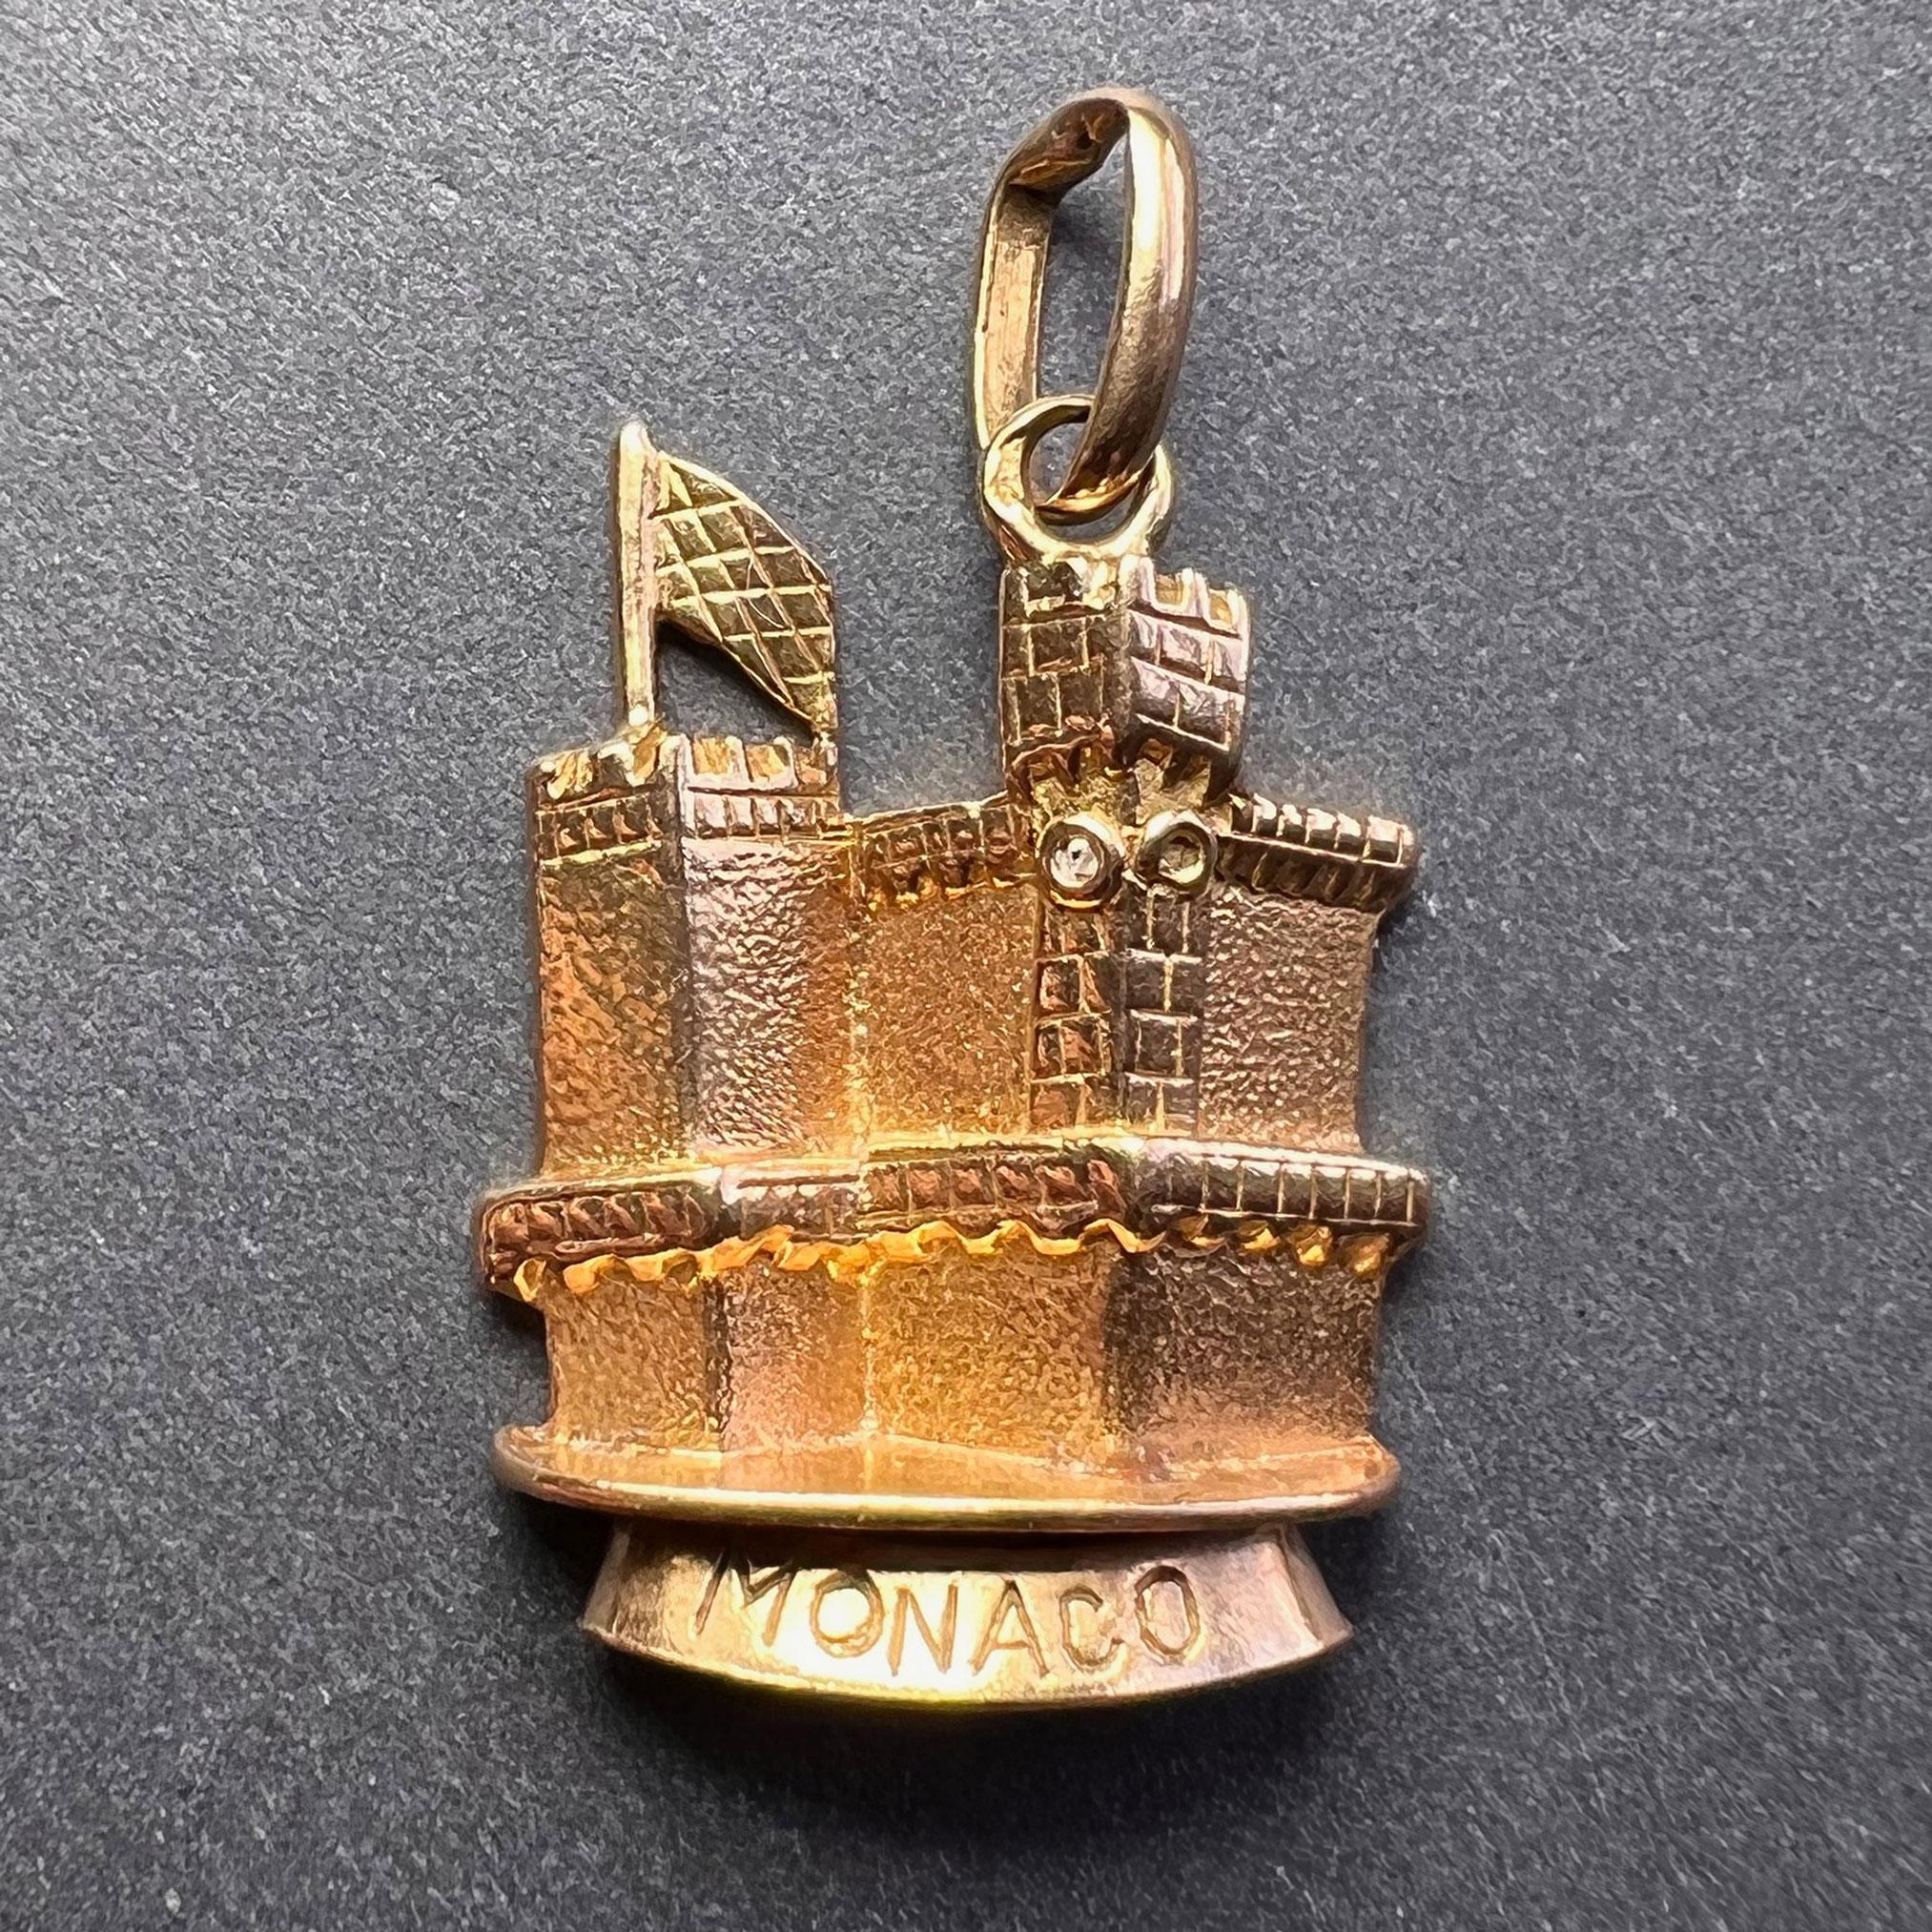 An 18 karat (18K) yellow gold charm pendant designed as a castle engraved Monaco. Stamped with the eagle mark for 18 karat gold and French manufacture.
 
Dimensions: 2 x 1.5 x 0.45 cm (not including jump ring)
Weight: 3.25 grams 
(Chain not